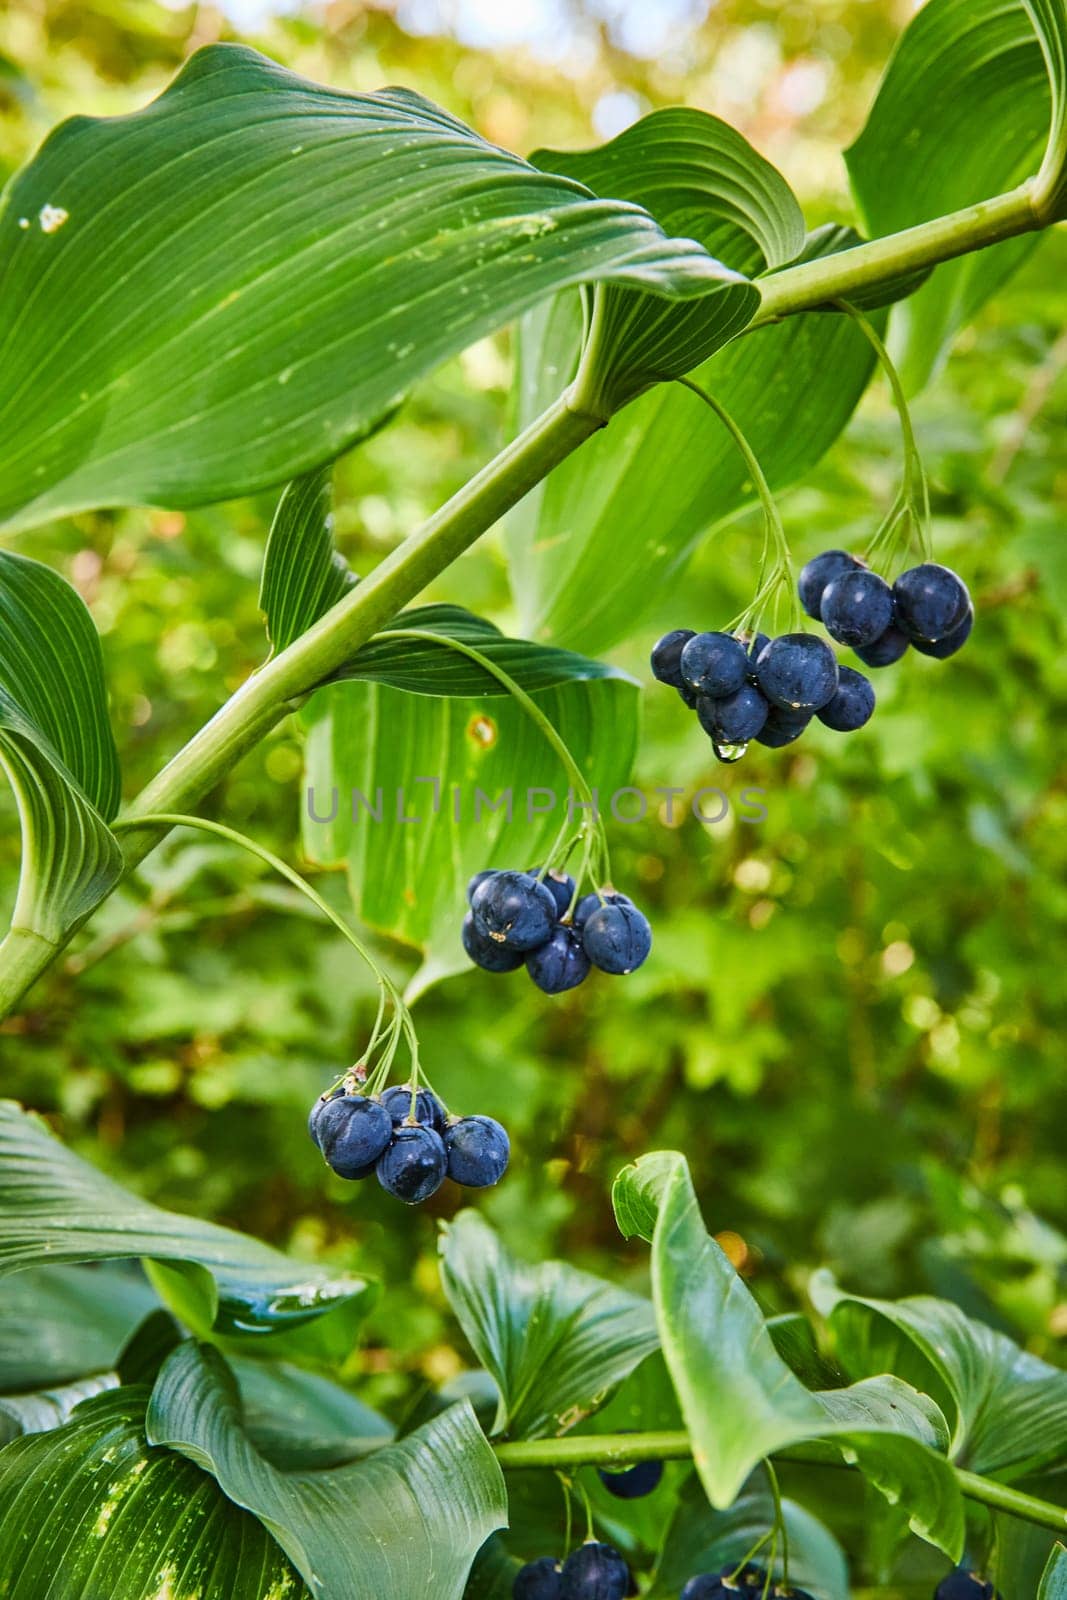 Solomon's Seal Berries and Leaves in Woodland Light by njproductions